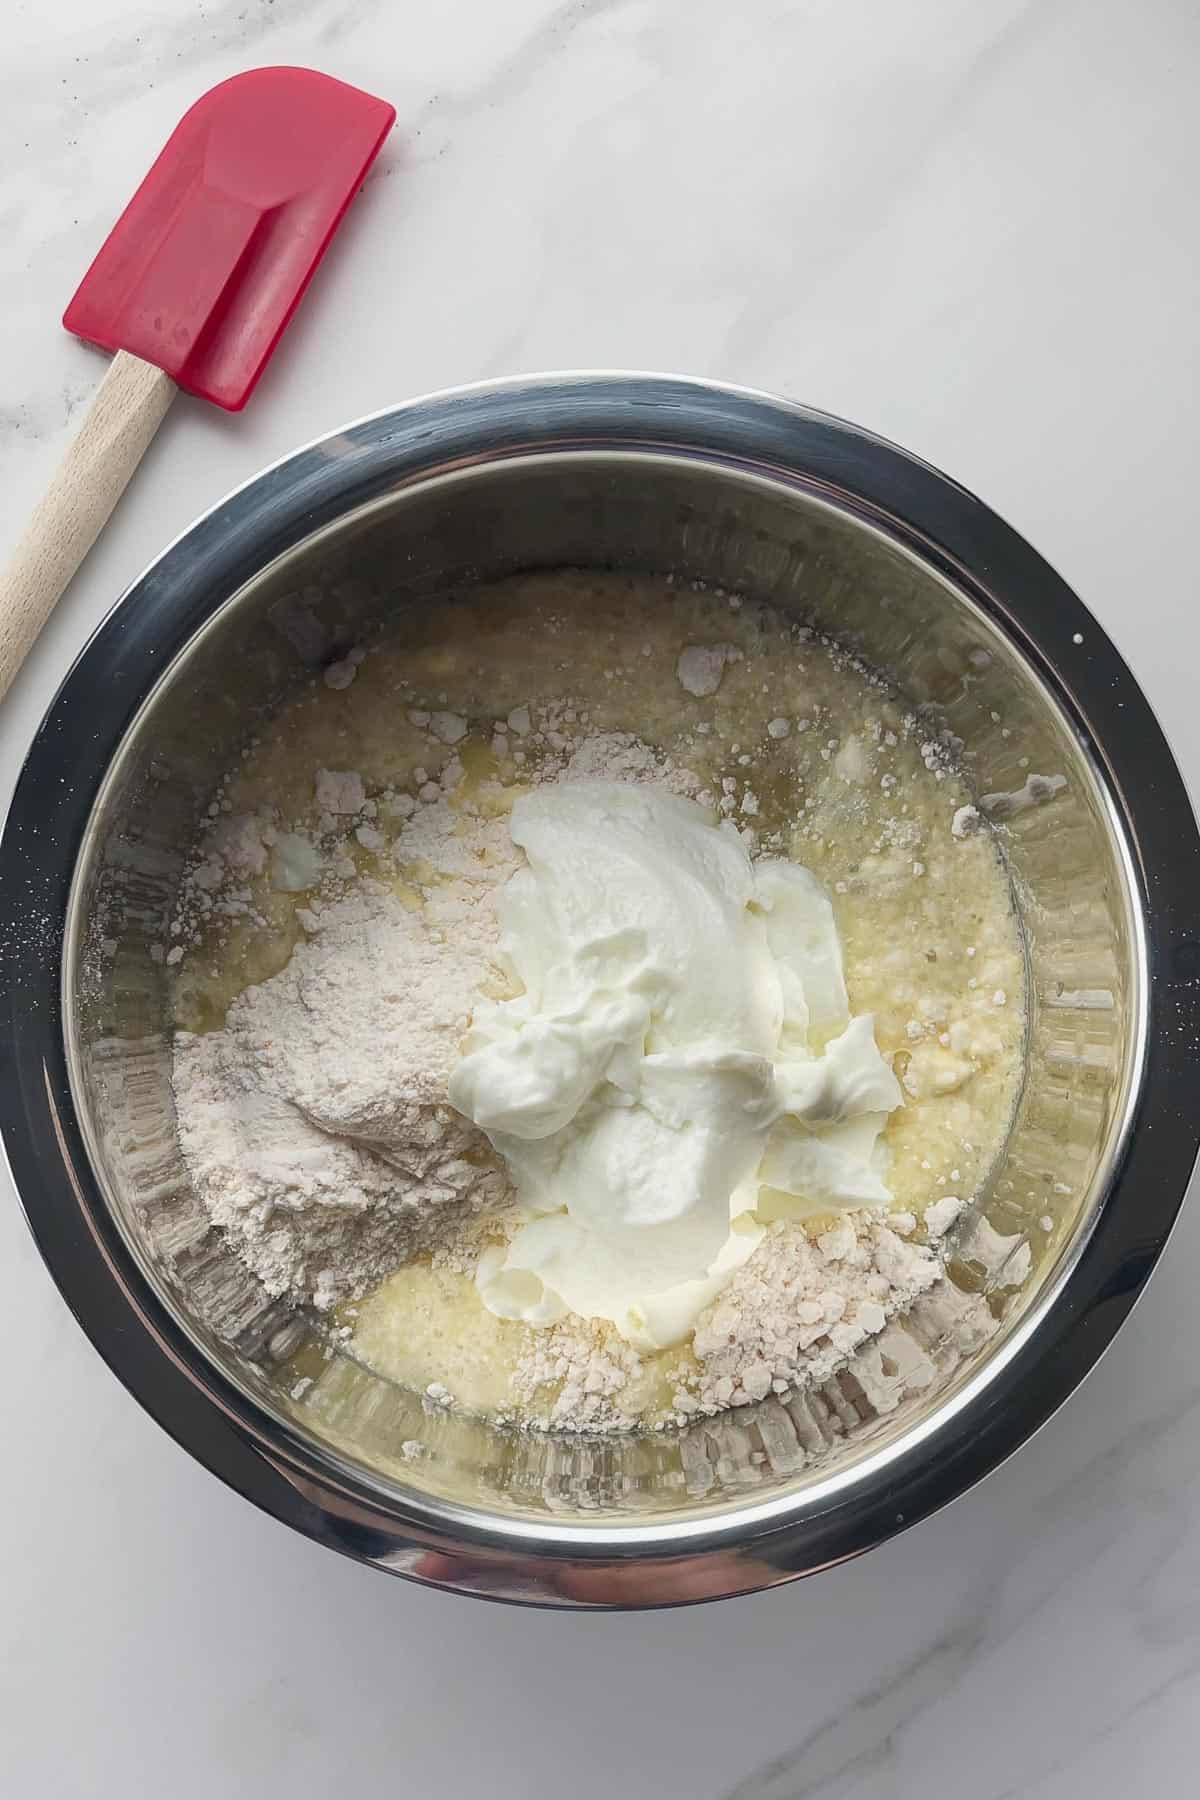 cake mix, water, and yogurt in a mixing bowl before stirring